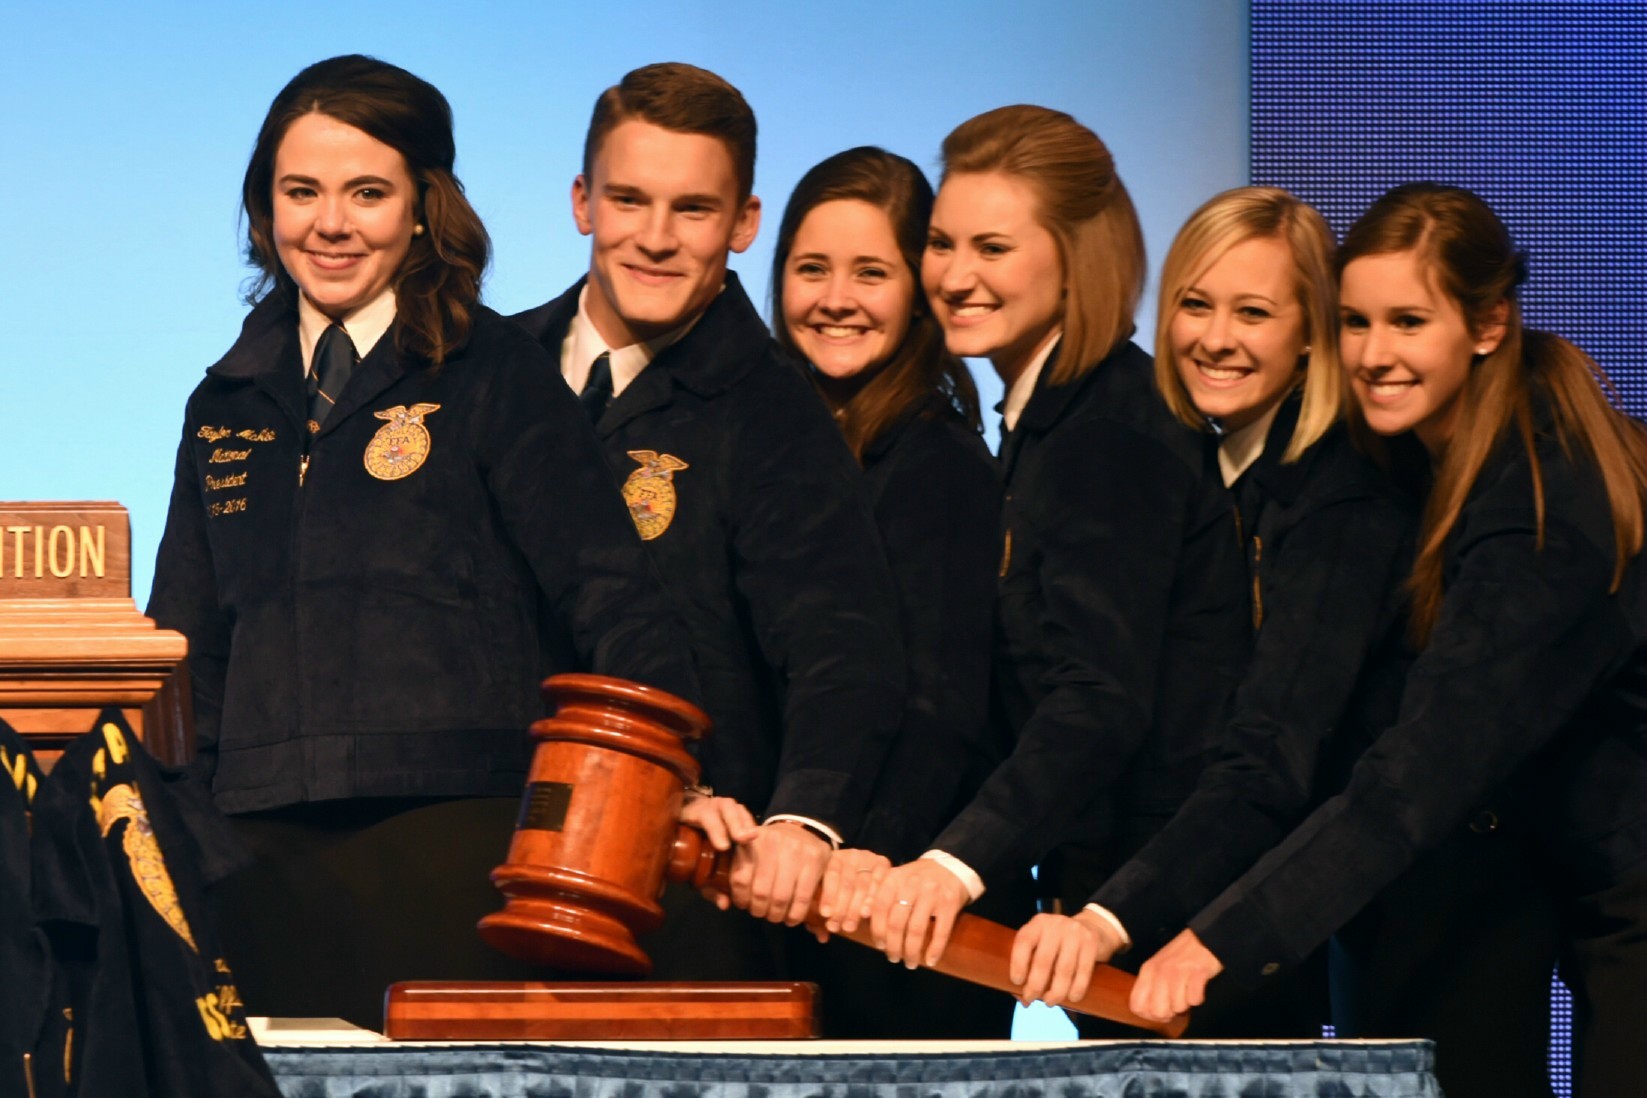 The 2015-16 National FFA Officer team was elected on Saturday, Oct. 31.